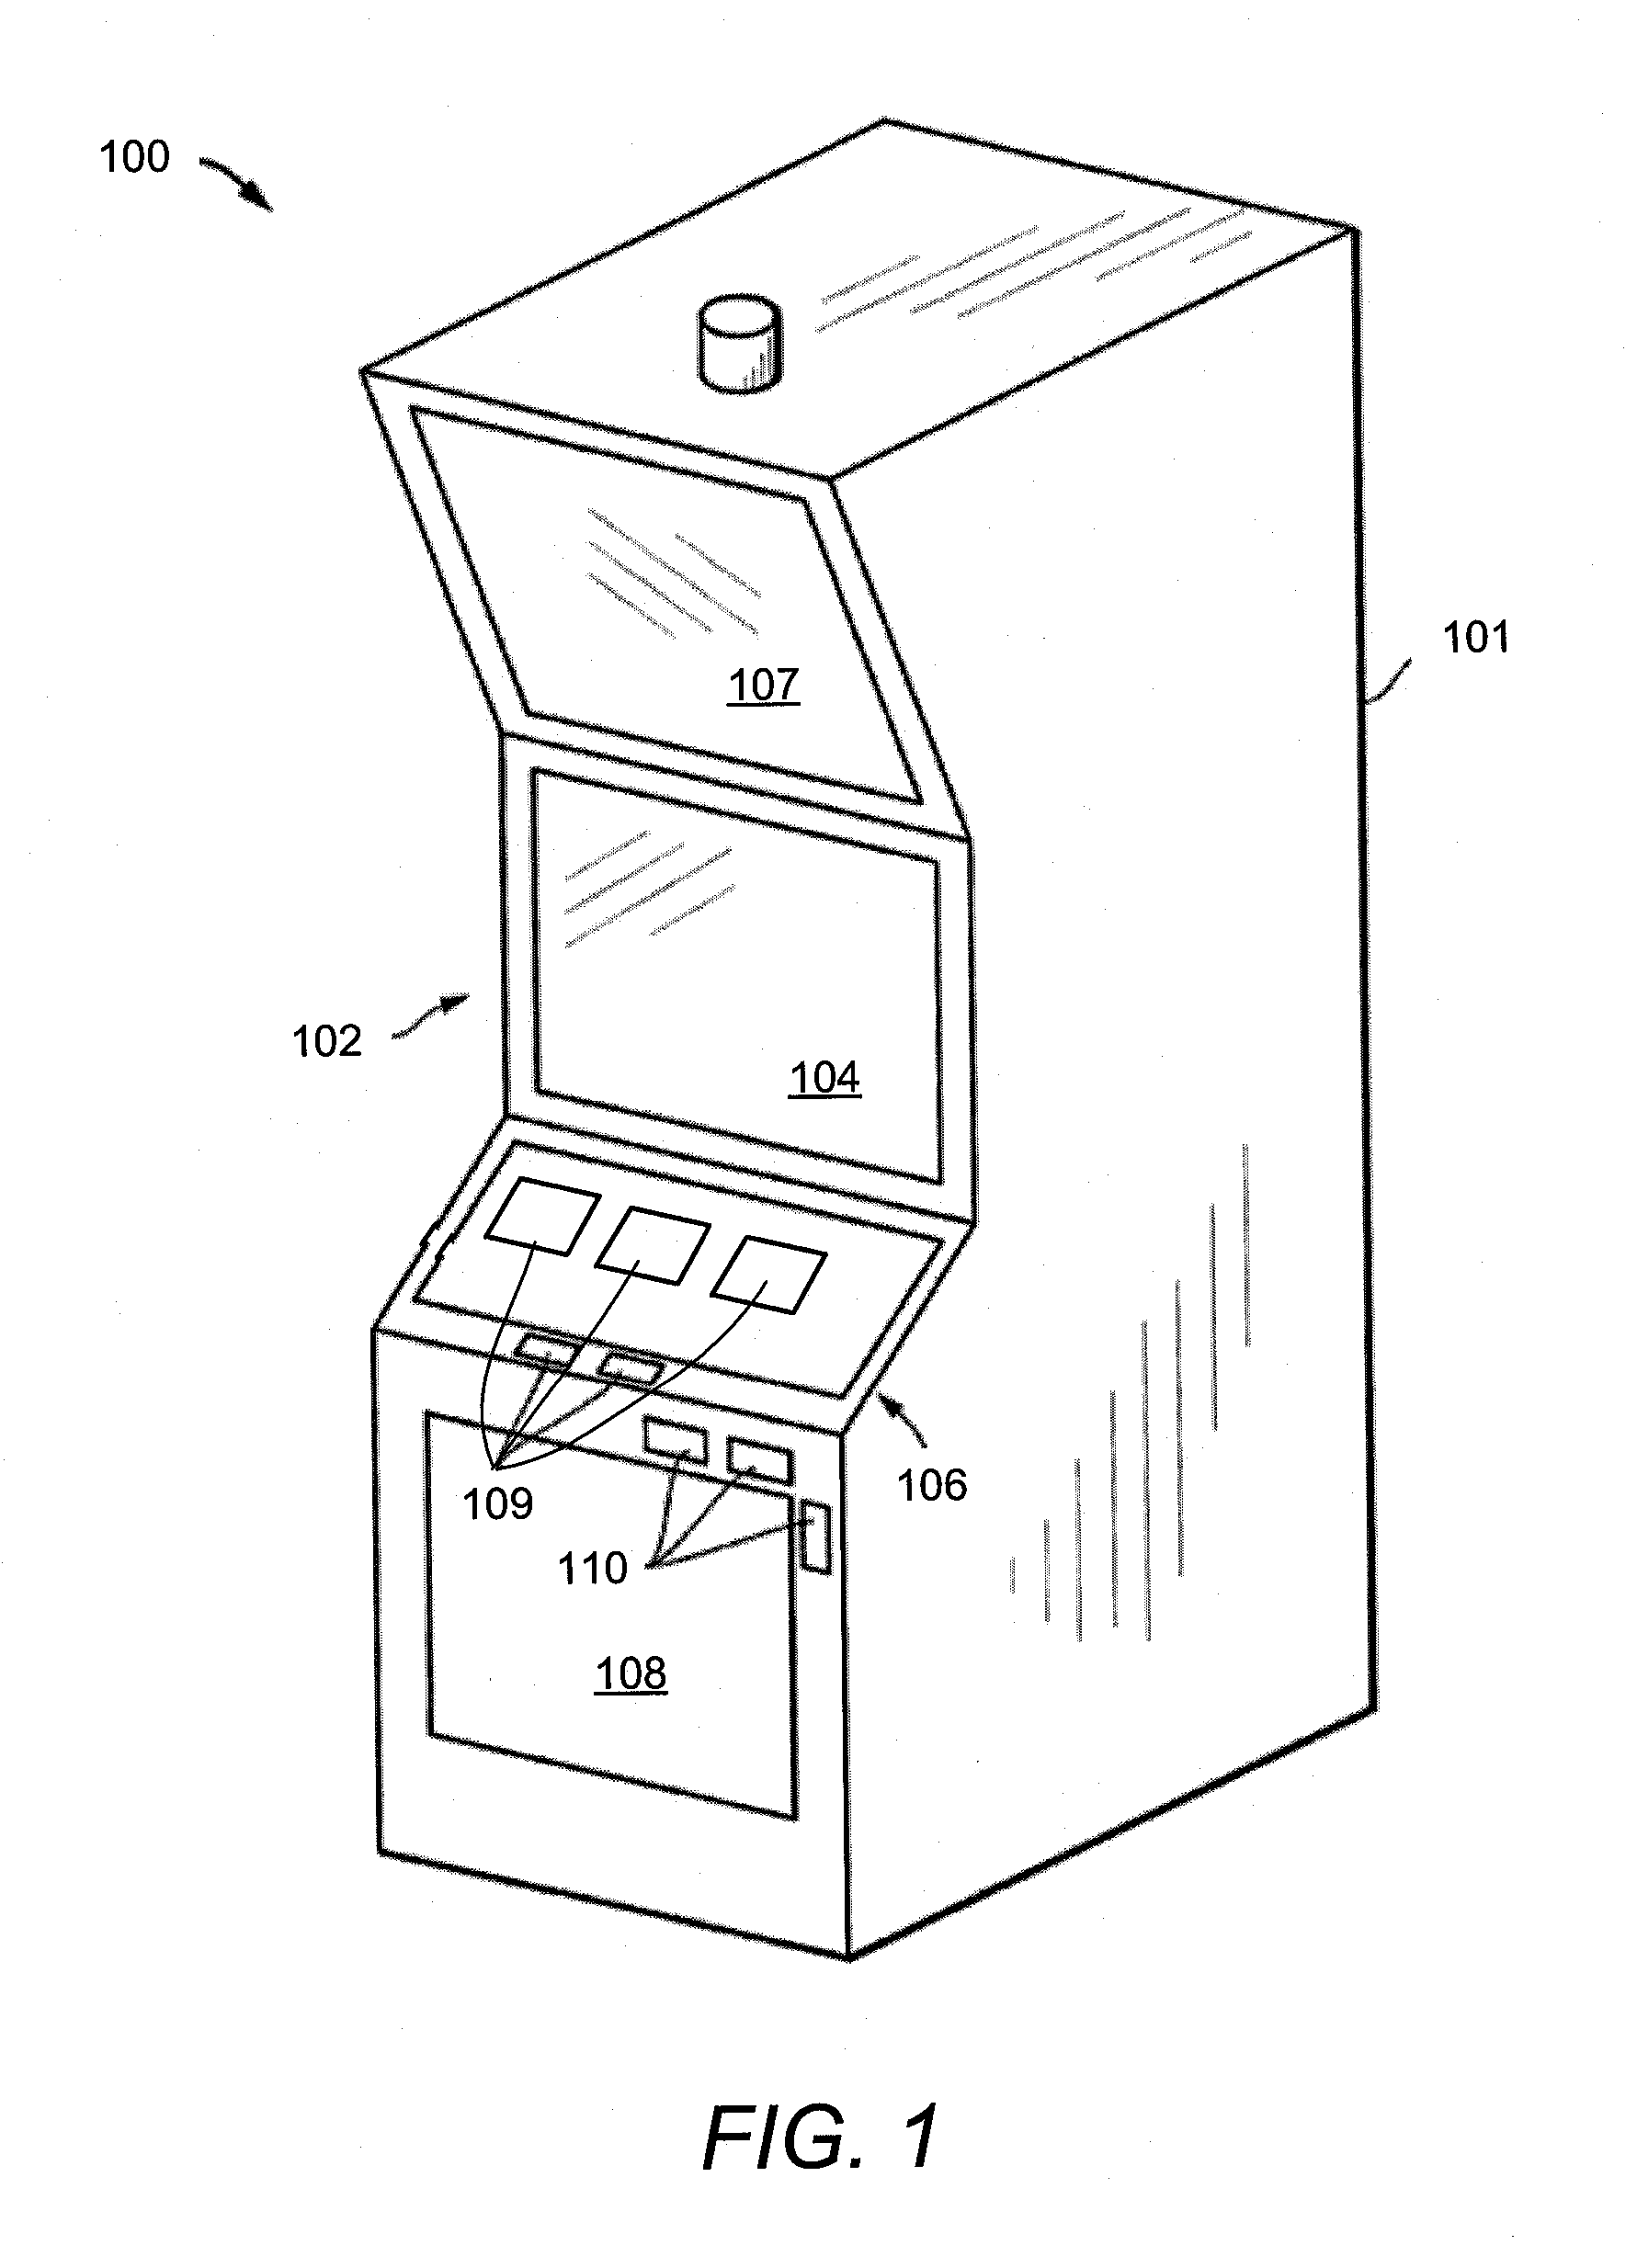 Method and apparatus for presenting bingo gaming results using multiple prize distributions